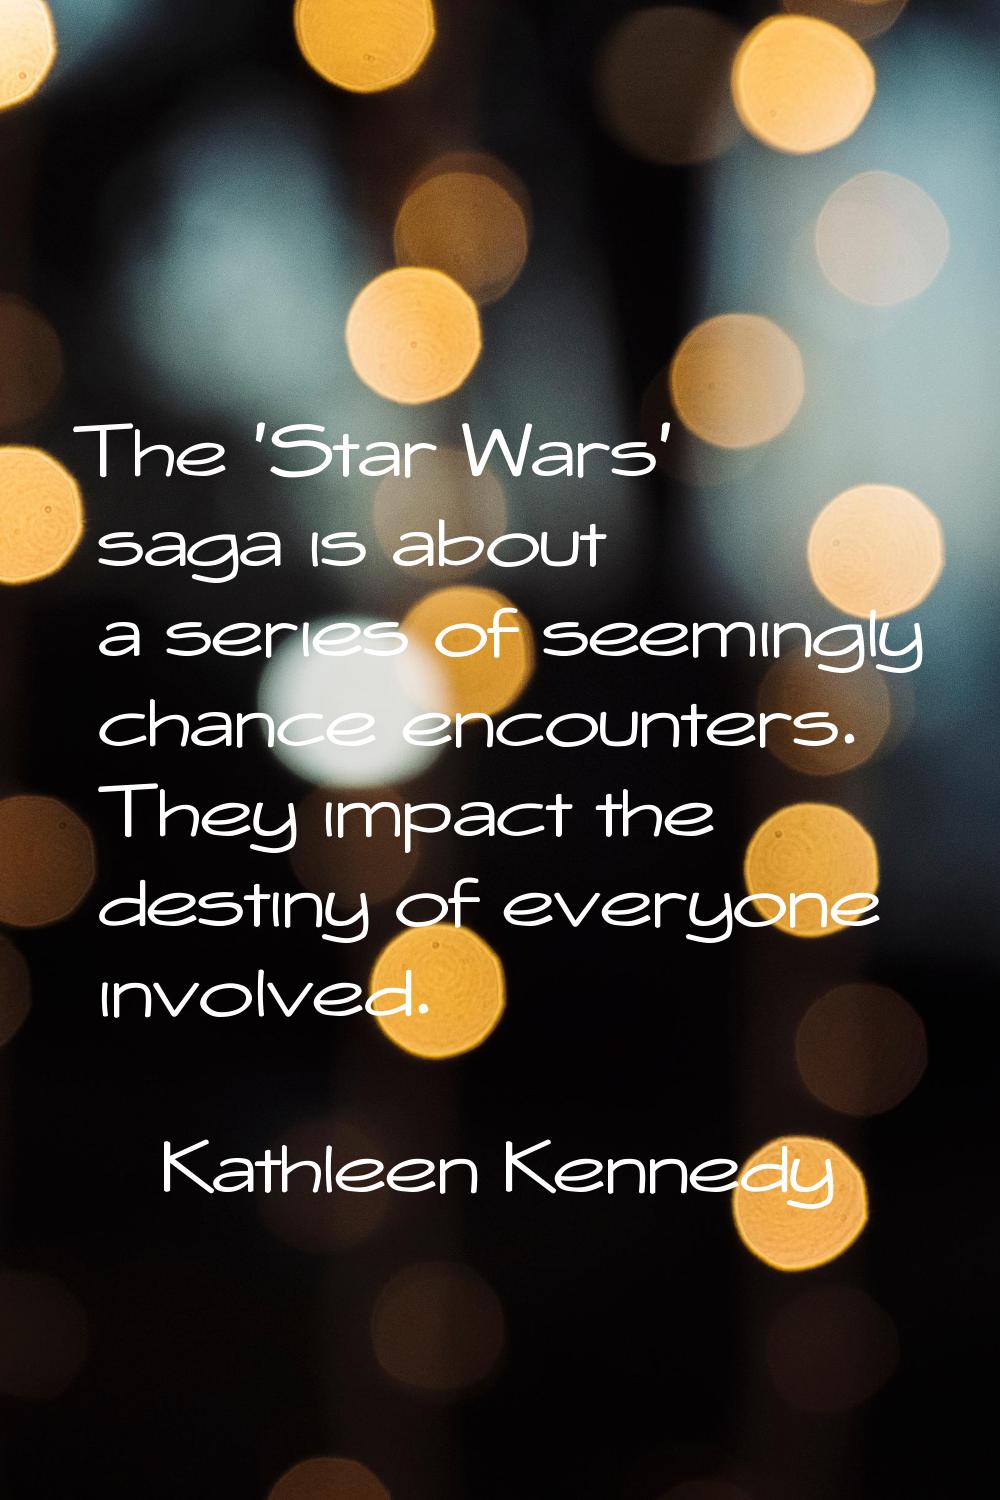 The 'Star Wars' saga is about a series of seemingly chance encounters. They impact the destiny of e